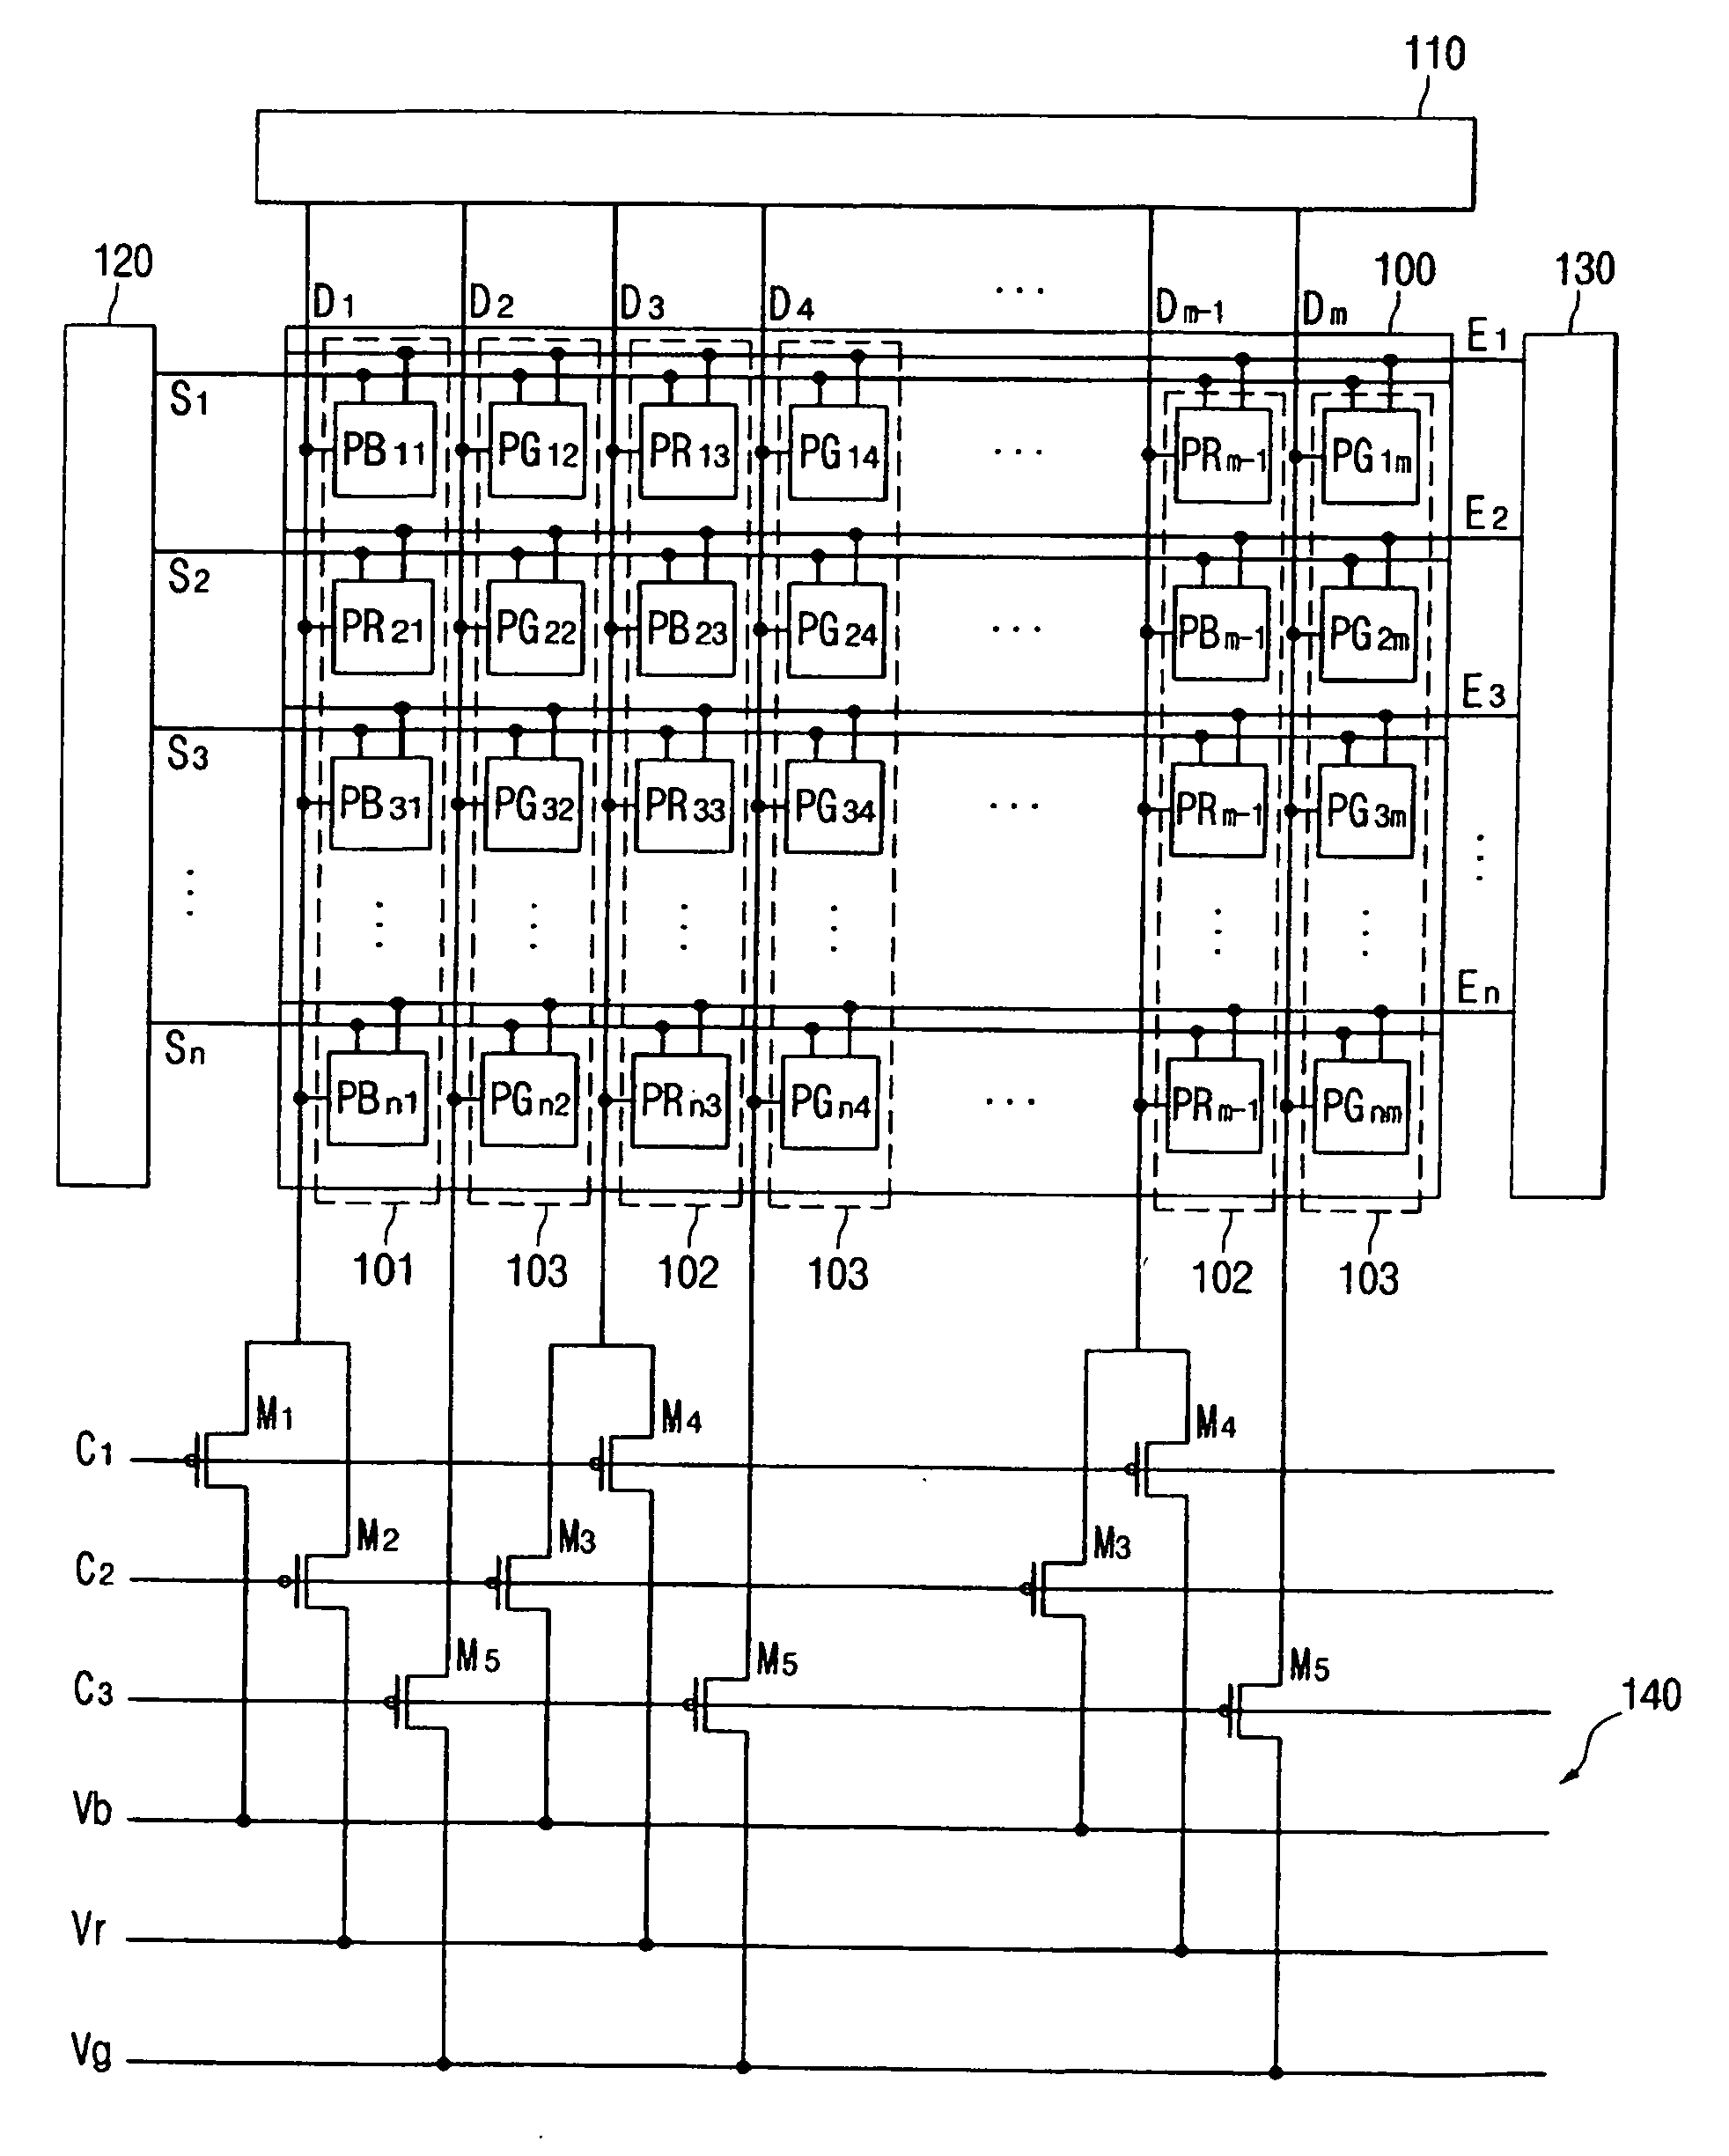 Flat panel display device, method of aging the same, and method of testing lighting of the same